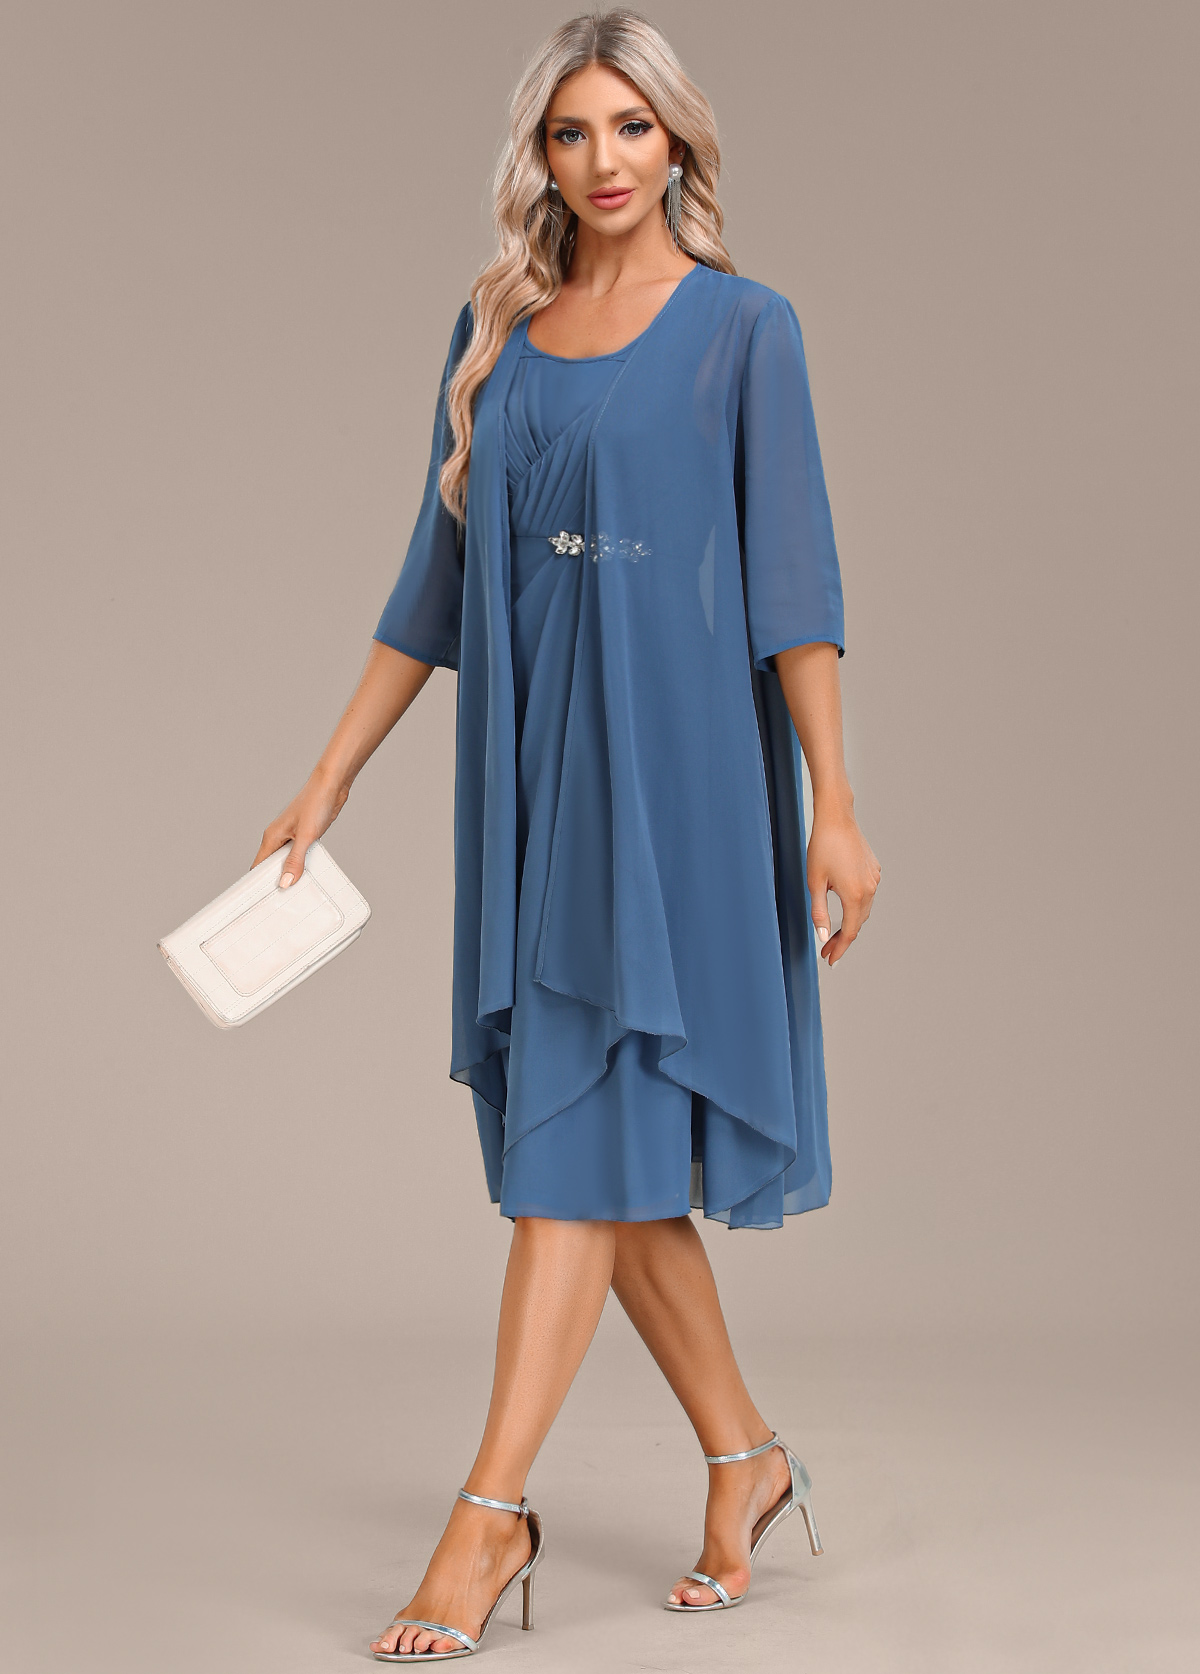 Hot Drilling Blue Round Neck Dress and Cardigan